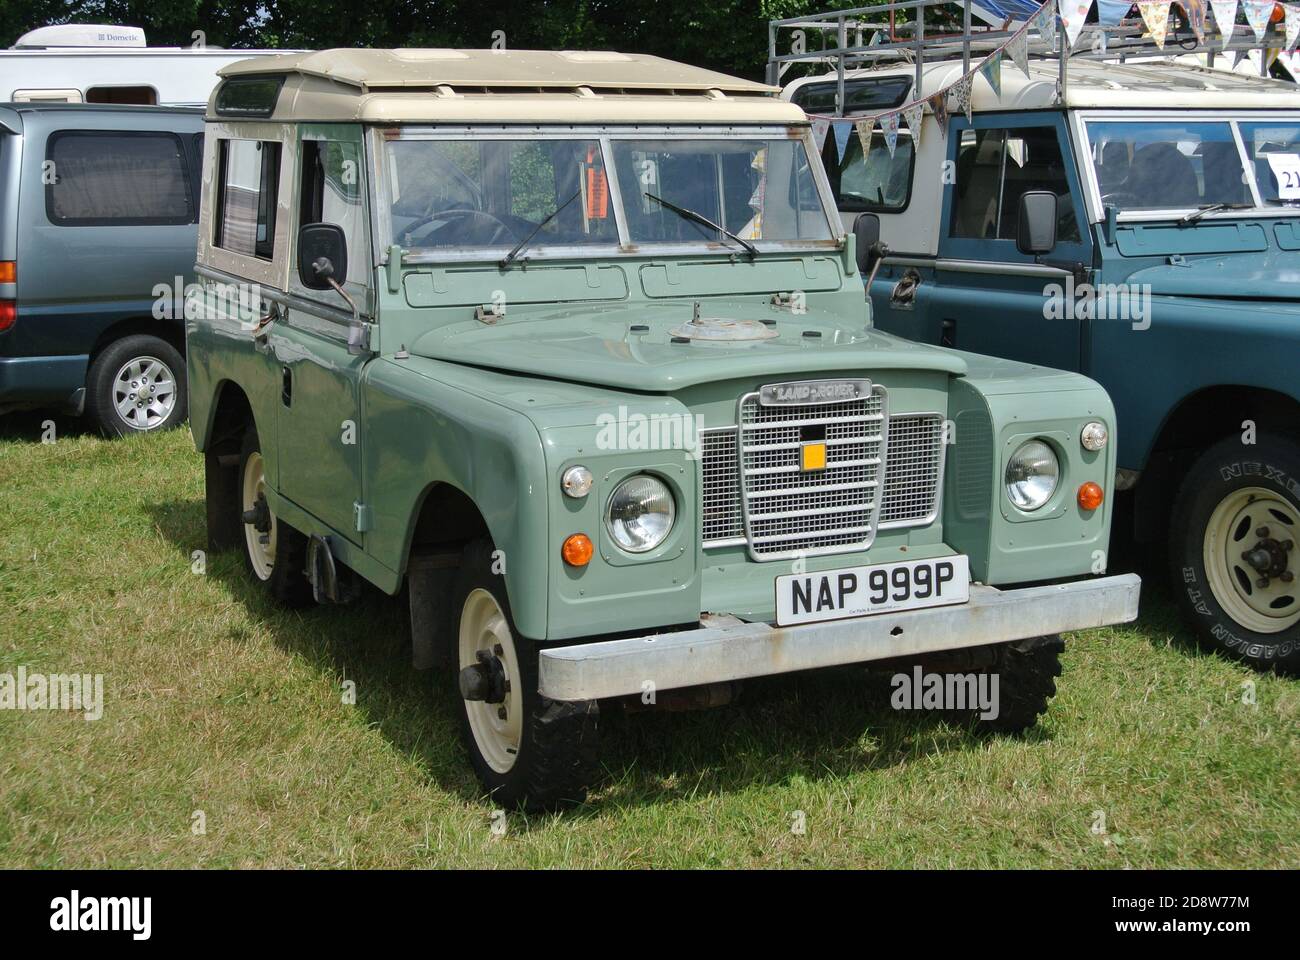 A 1976 Land Rover 88 series 3 parked up on display at the Torbay Steam Fair, Churston, Devon, England, UK. Stock Photo